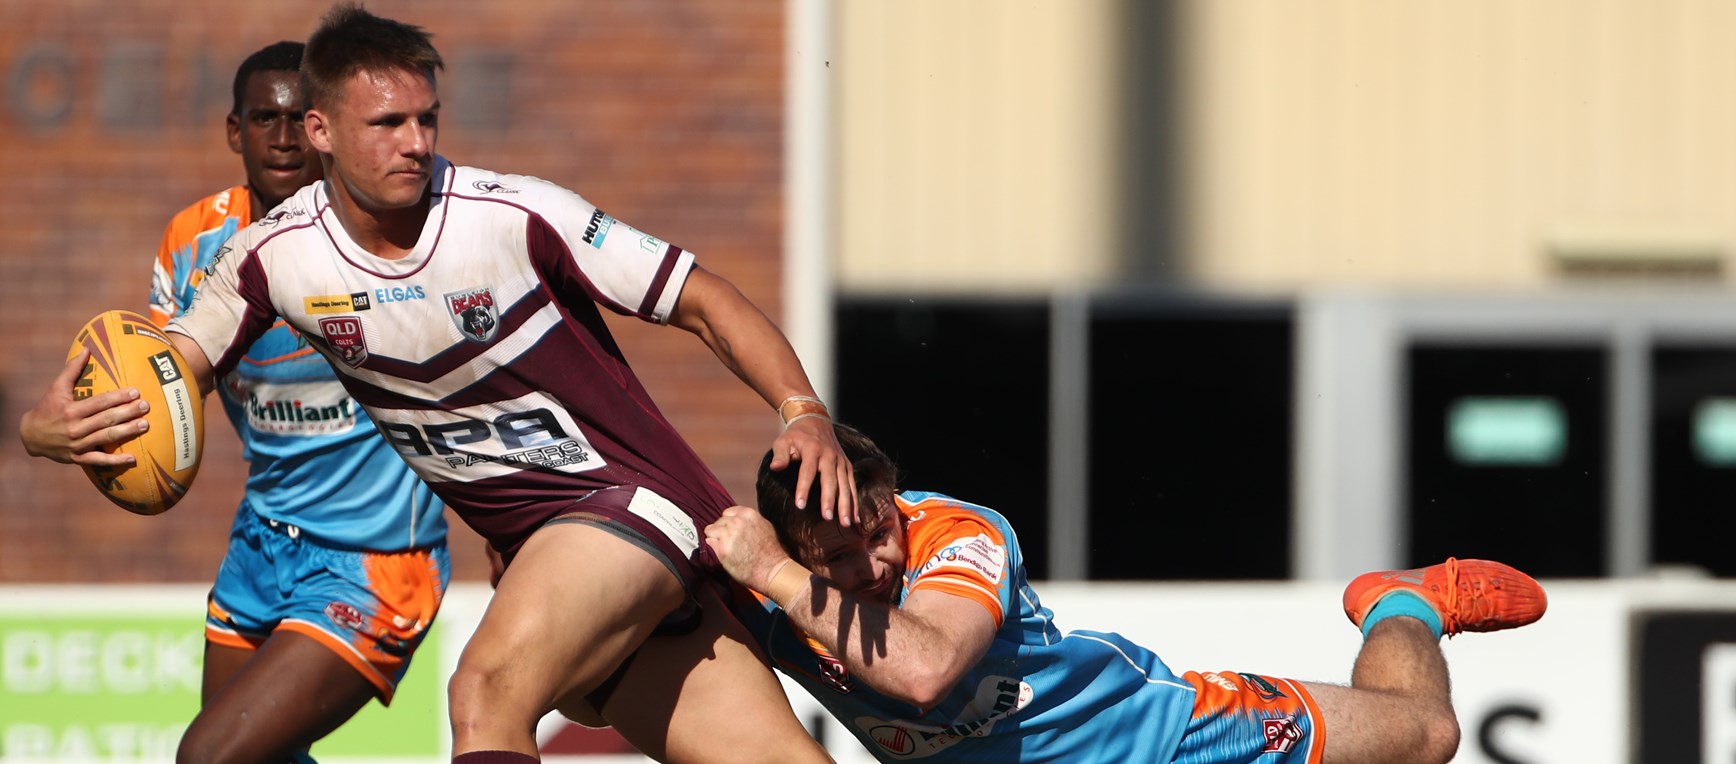 In pictures: Hastings Deering Colts Round 21